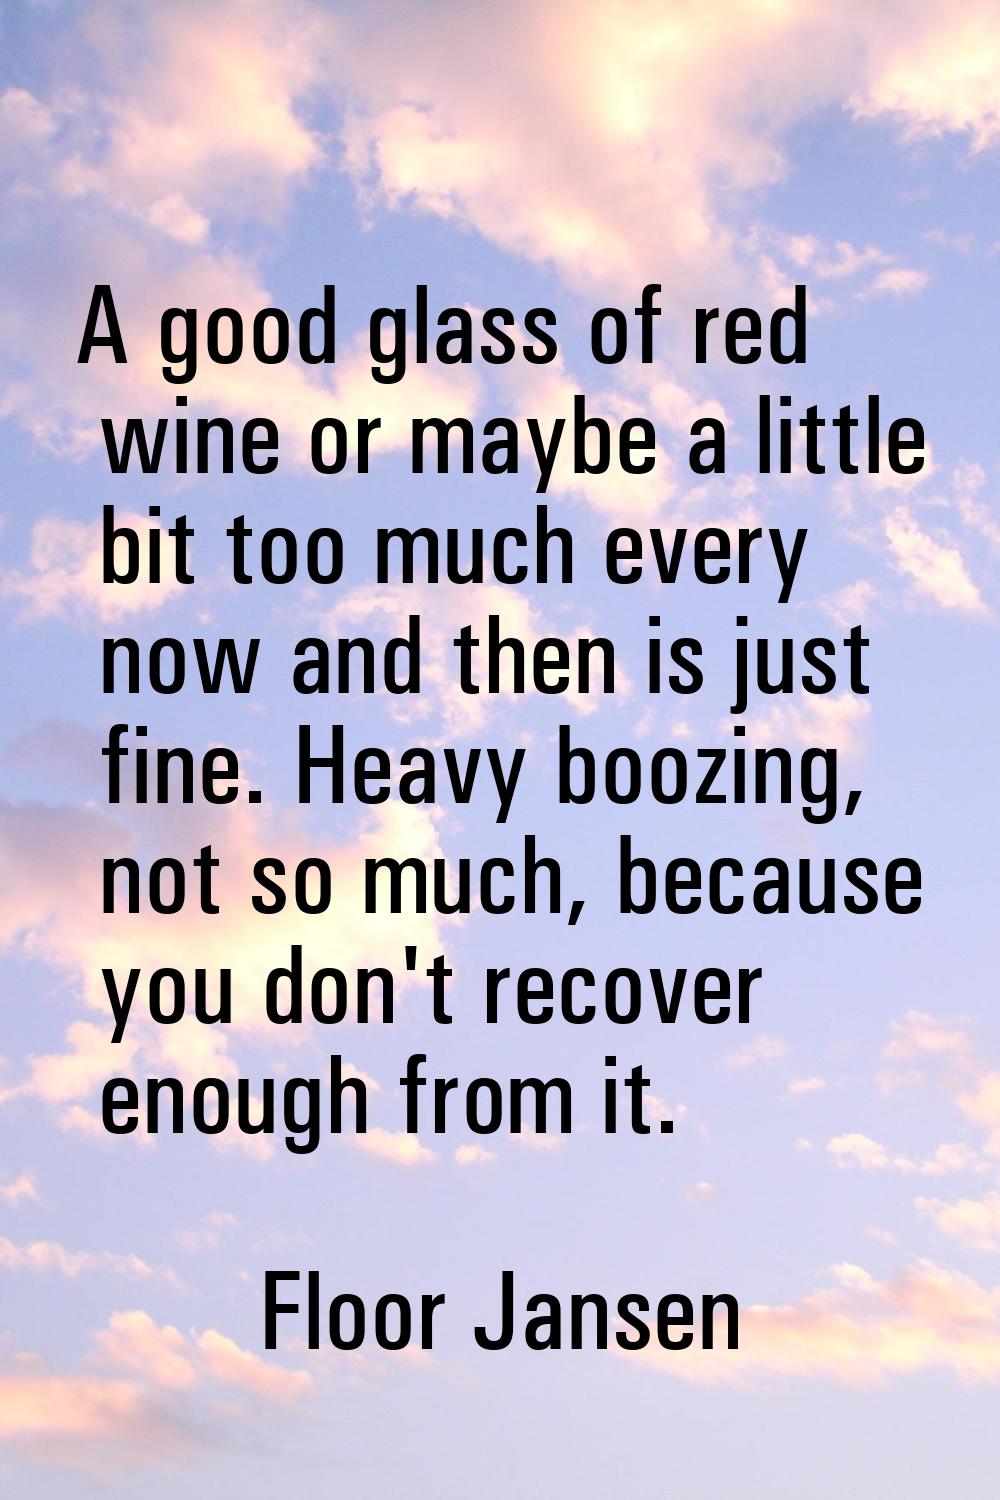 A good glass of red wine or maybe a little bit too much every now and then is just fine. Heavy booz